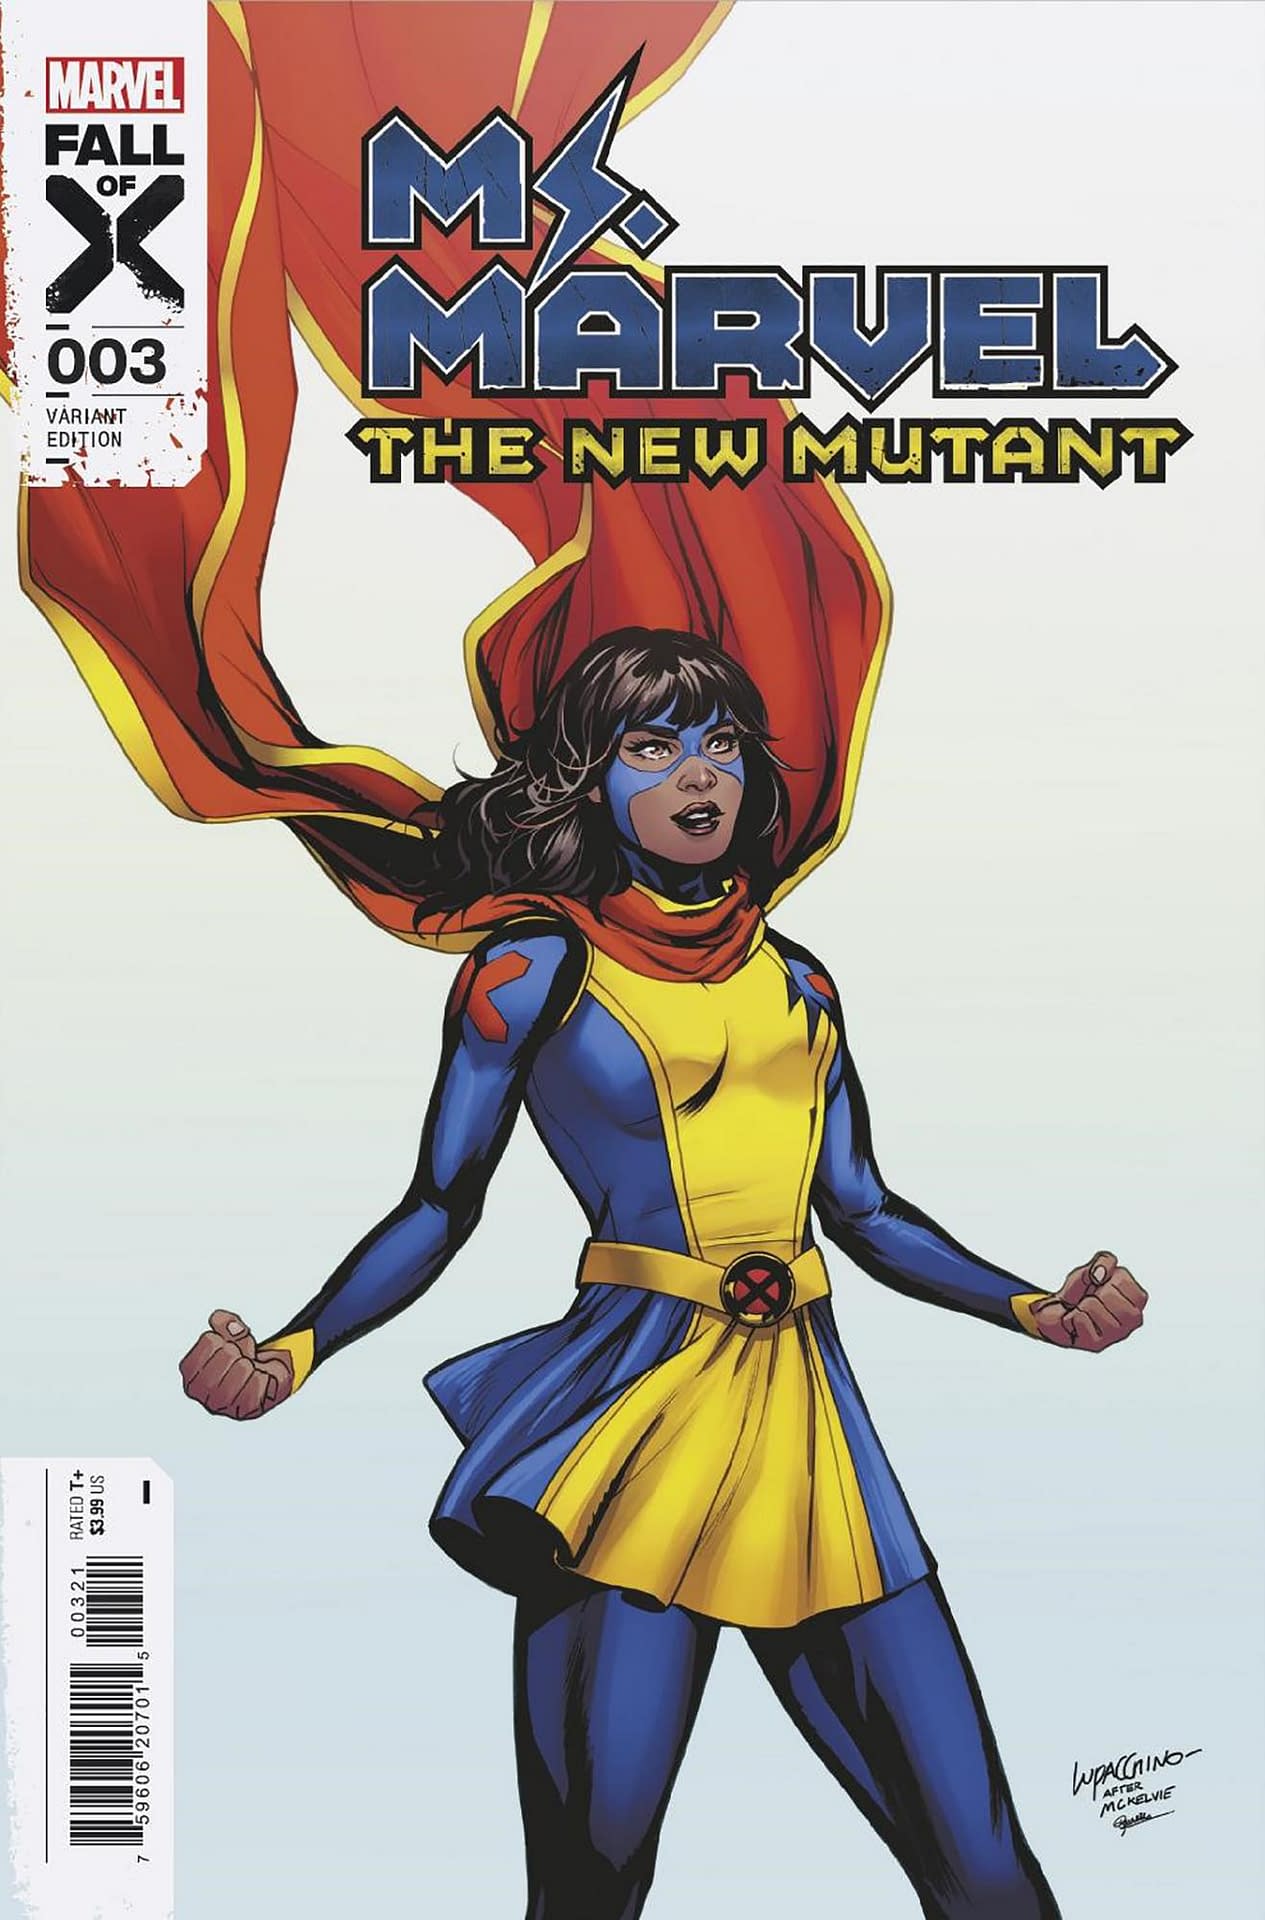 Ms. Marvel: The New Mutant #2 Preview - The Comic Book Dispatch